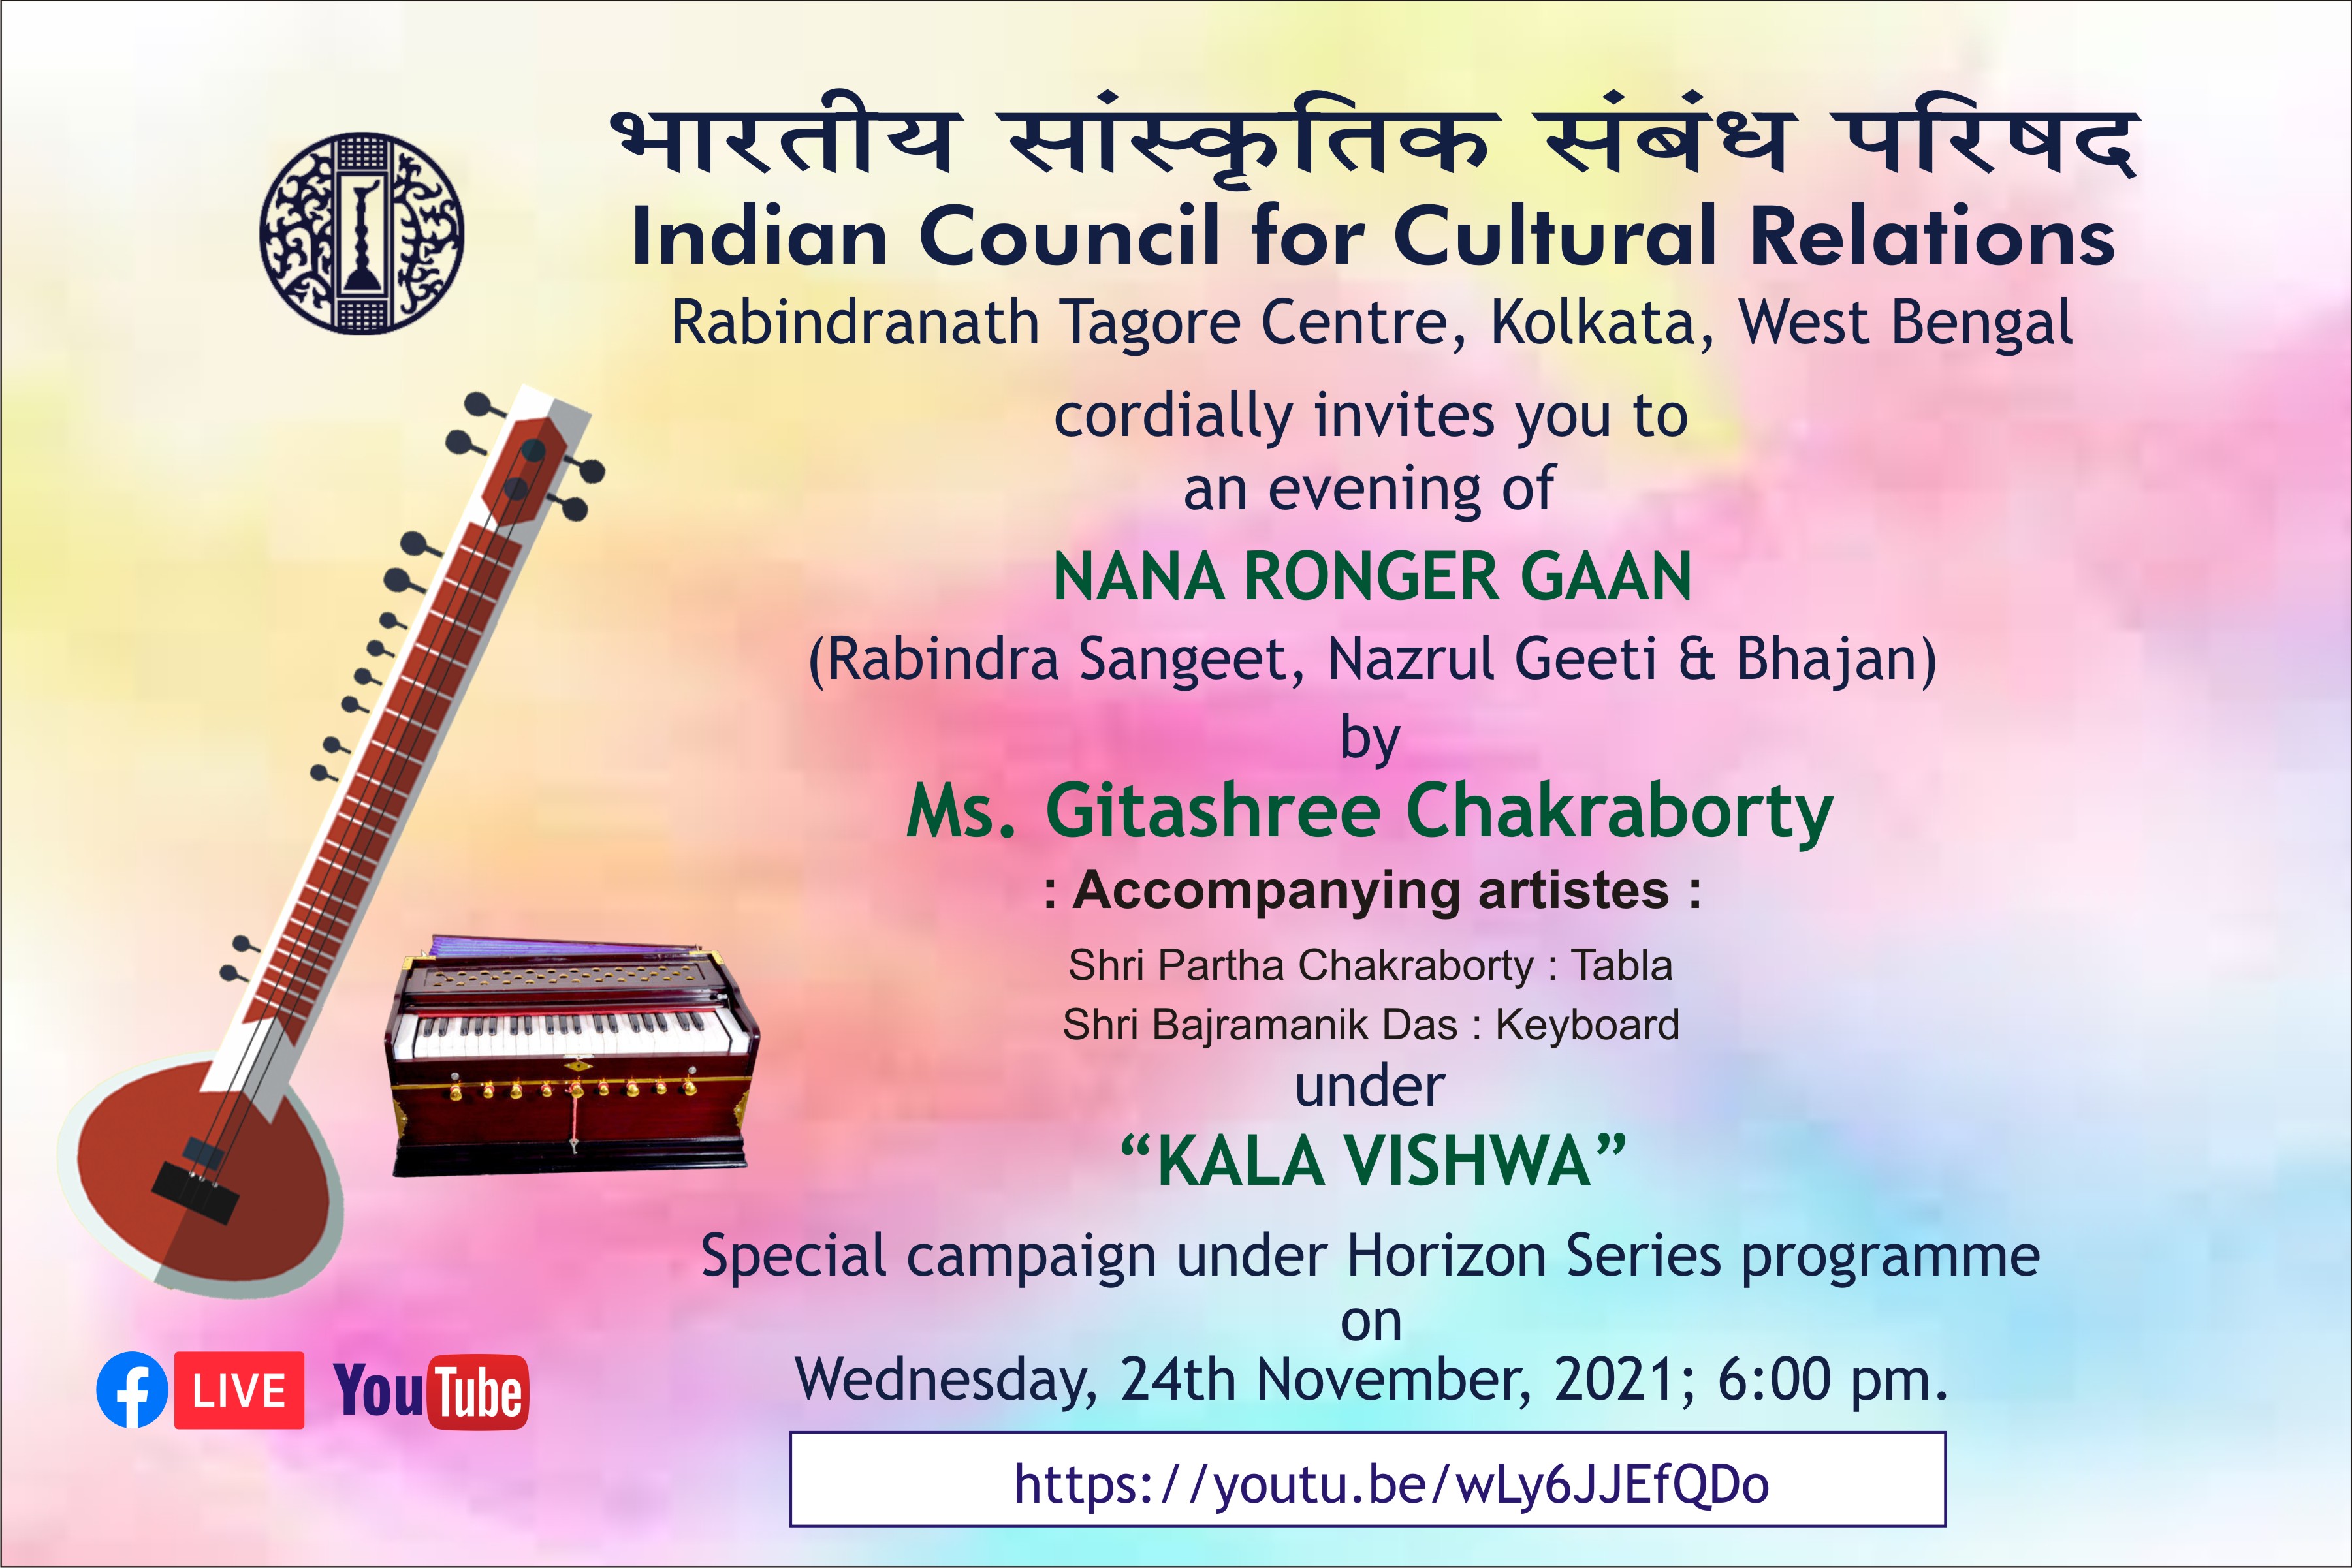 The Indian Council for Cultural Relations (ICCR), Regional Office, Kolkata cordially invites you to the "KALA VISHWA" : A Special campaign under Horizon Series "NANA RONGER GAAN" by Ms. Gitashree Chakraborty on Wednesday, 24th November, 2021 at 6.00 pm.